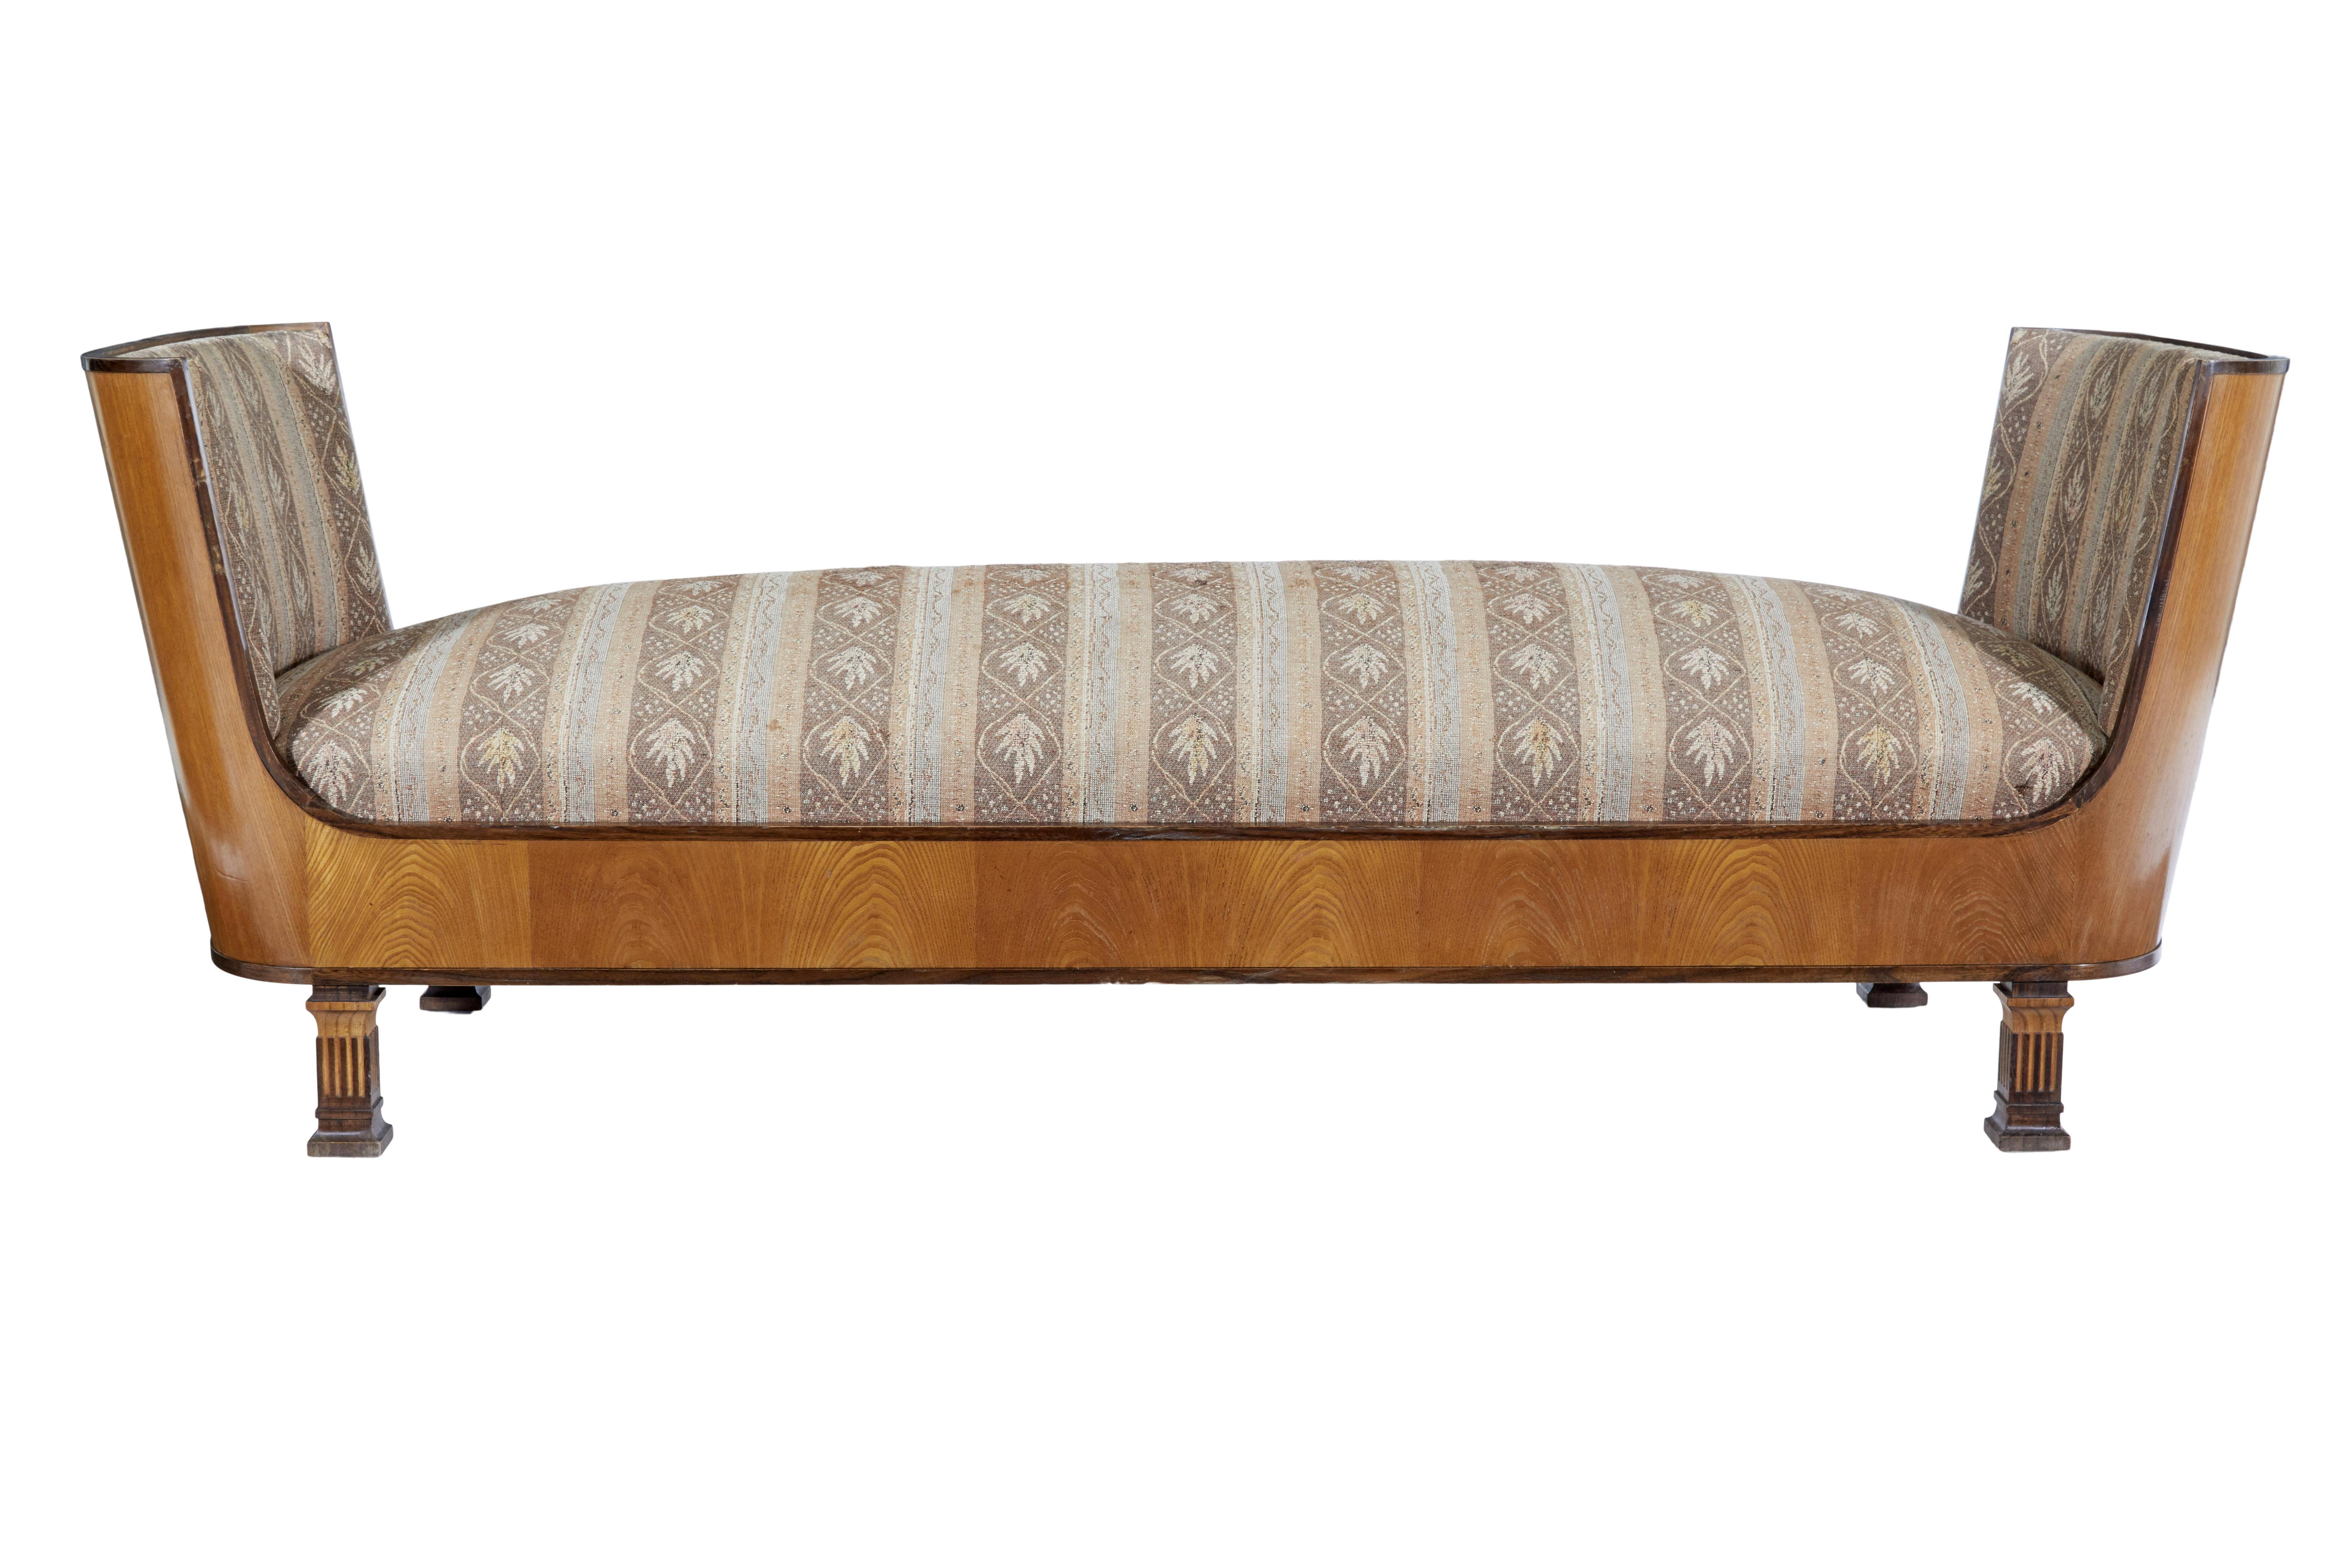 Erik Chambert Art Deco elm and birch daybed, circa 1930.

Stunning shaped daybed by well known designer Erik Chambert (1902-1988)

Shaped ends wrapped round with elm veneer and birch edging, fitted with a removable seat and a rest each end.